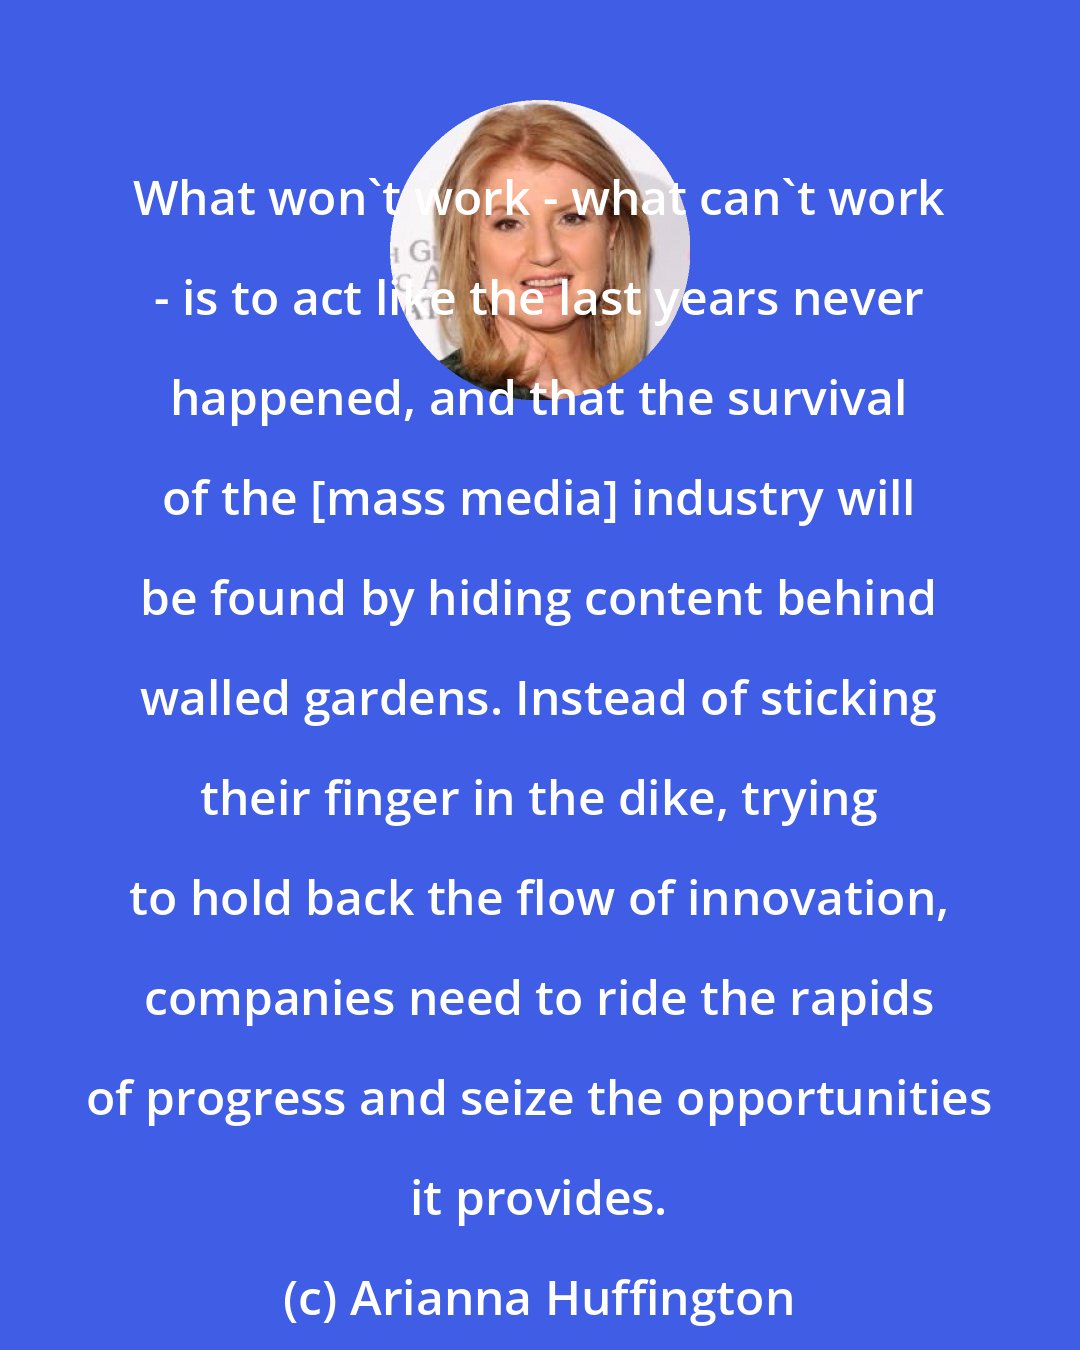 Arianna Huffington: What won't work - what can't work - is to act like the last years never happened, and that the survival of the [mass media] industry will be found by hiding content behind walled gardens. Instead of sticking their finger in the dike, trying to hold back the flow of innovation, companies need to ride the rapids of progress and seize the opportunities it provides.